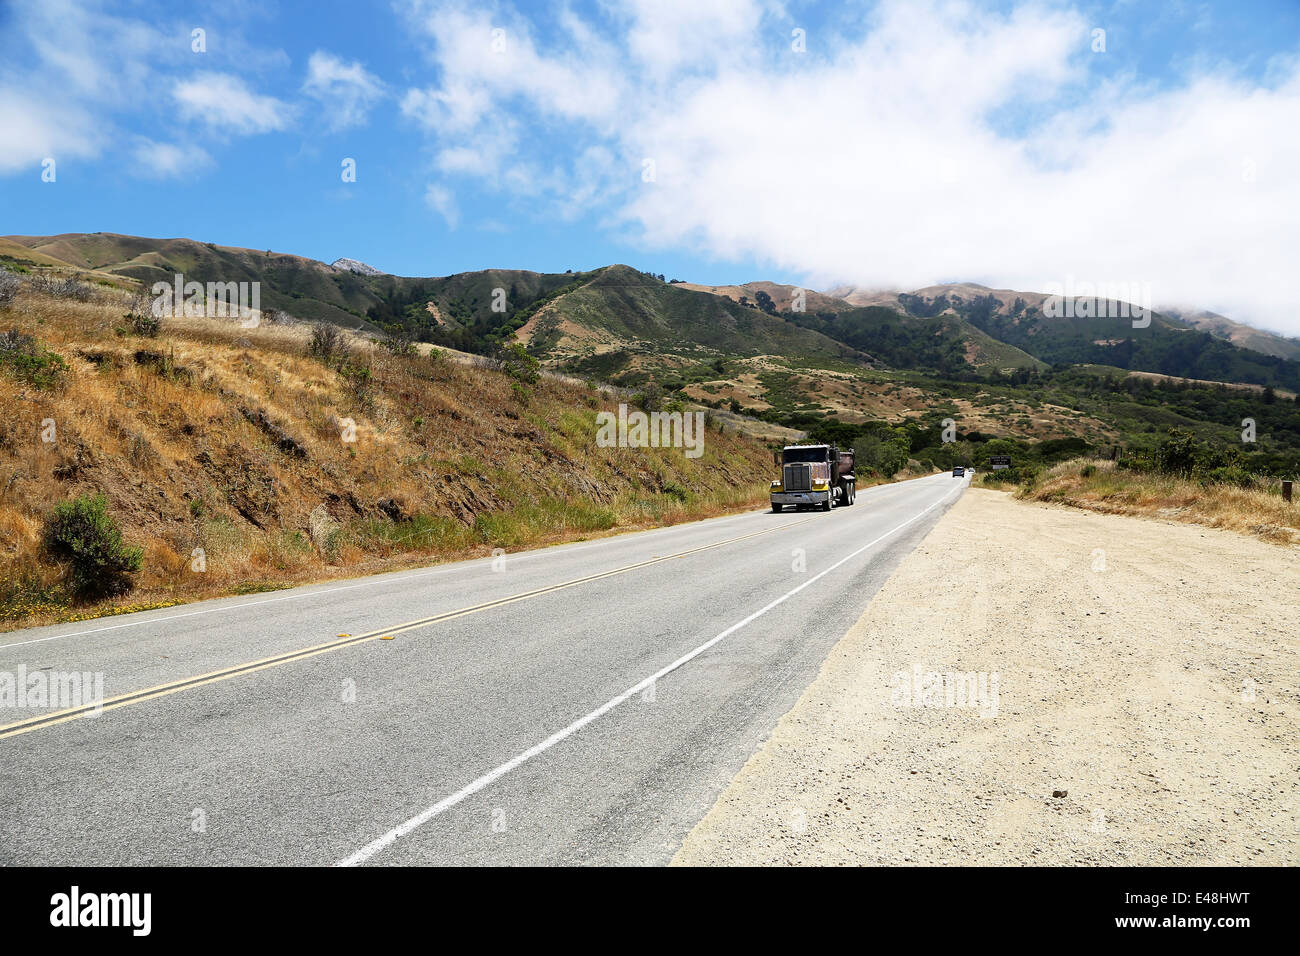 Truck driving on Route 1, Pacific Highway 101 California on the way from Big Sur, with stunning views of the scenery and ocean Stock Photo